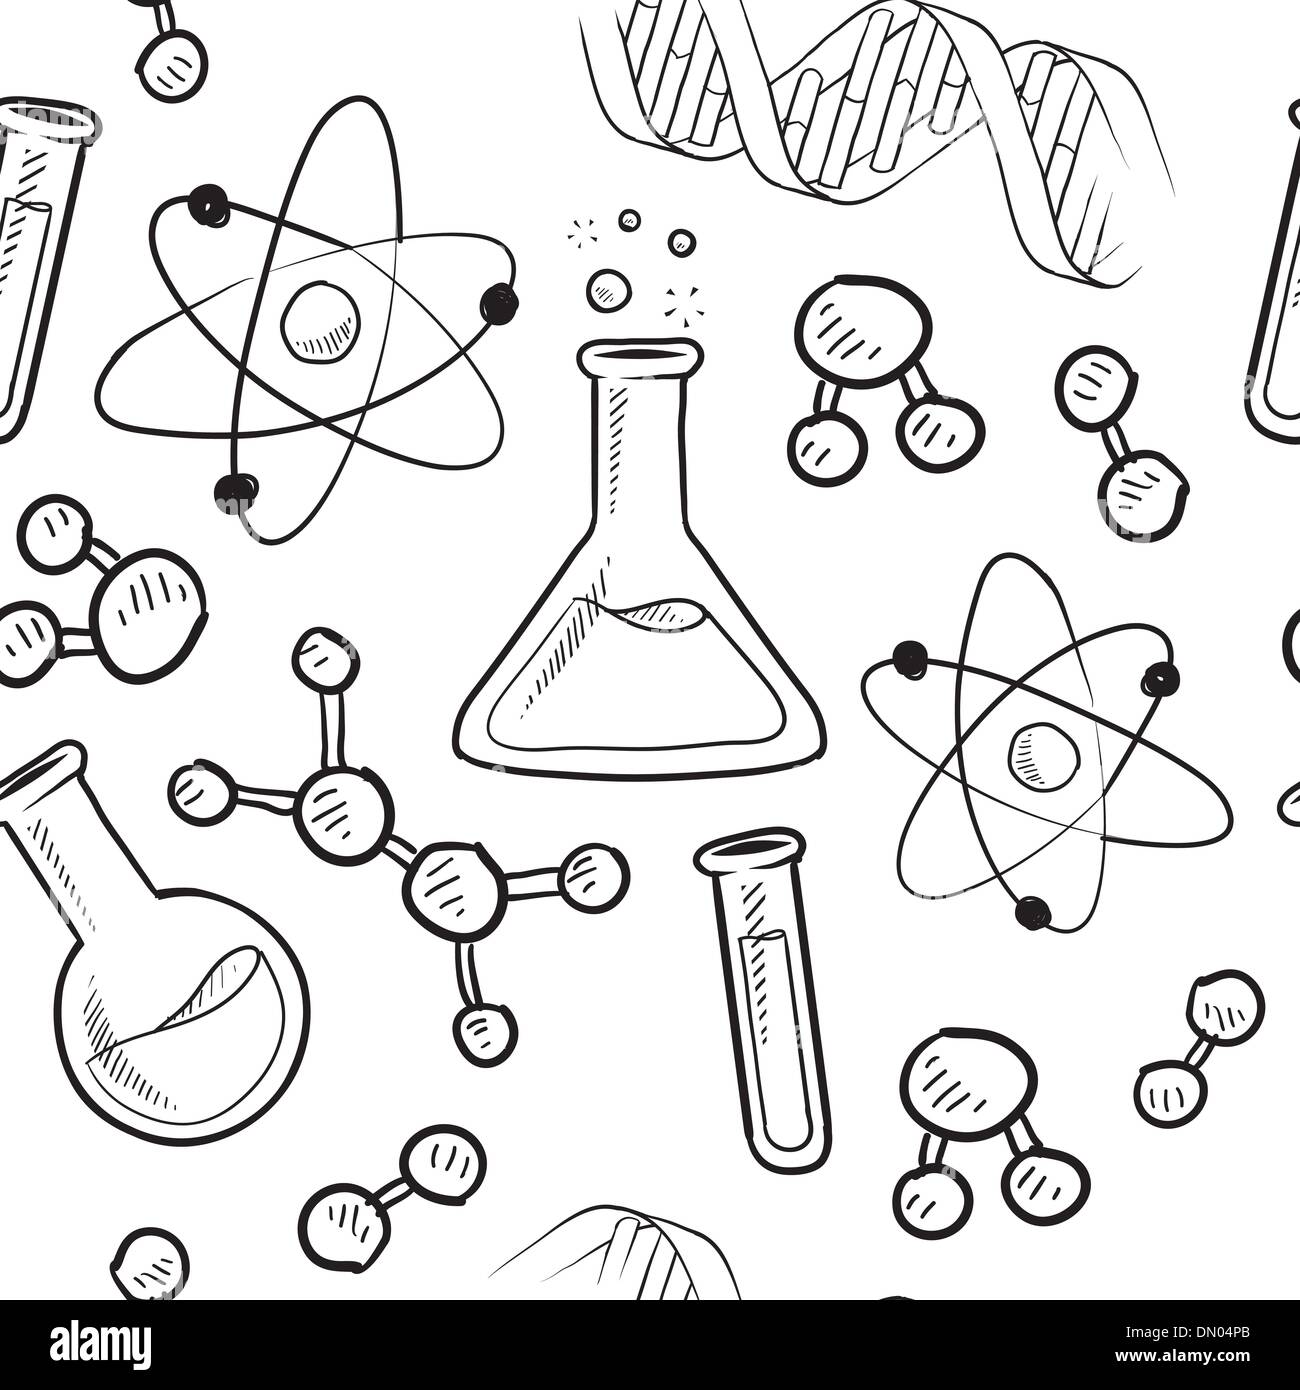 cool science images black and white